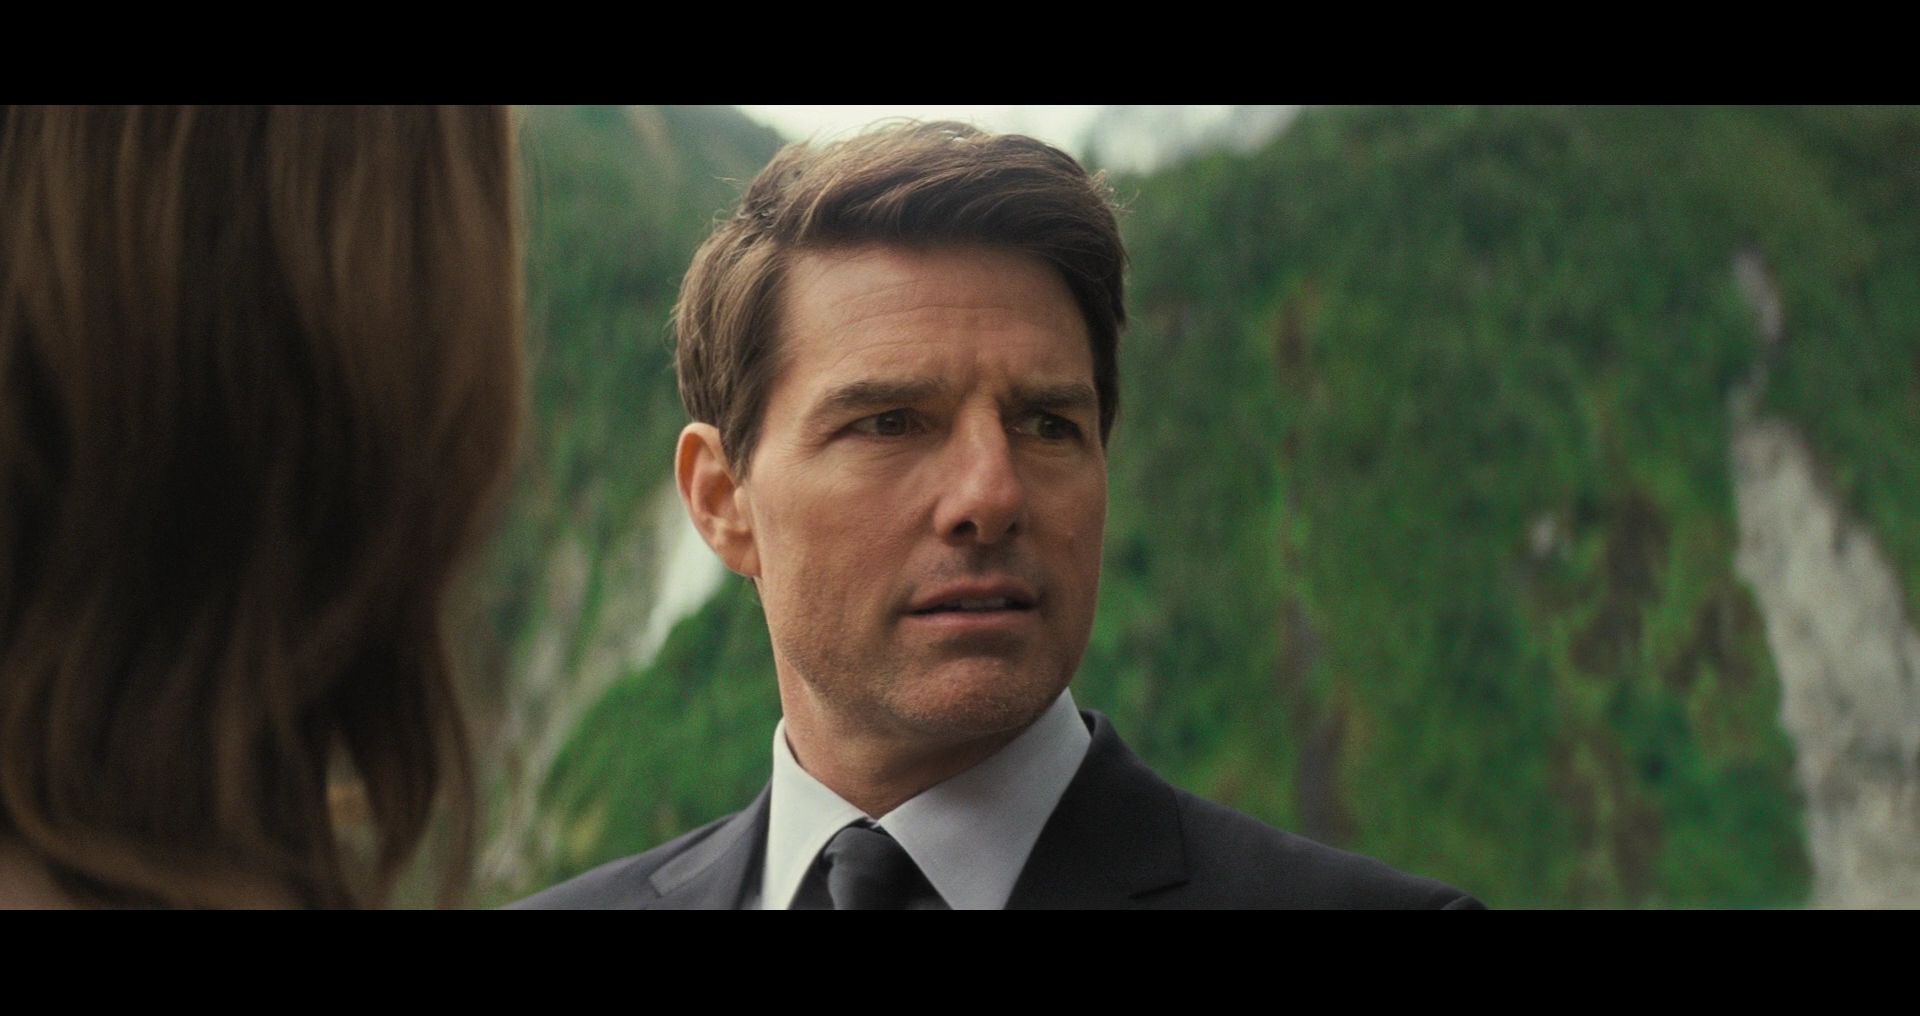 Mission-Impossible-Fallout-0028.jpg